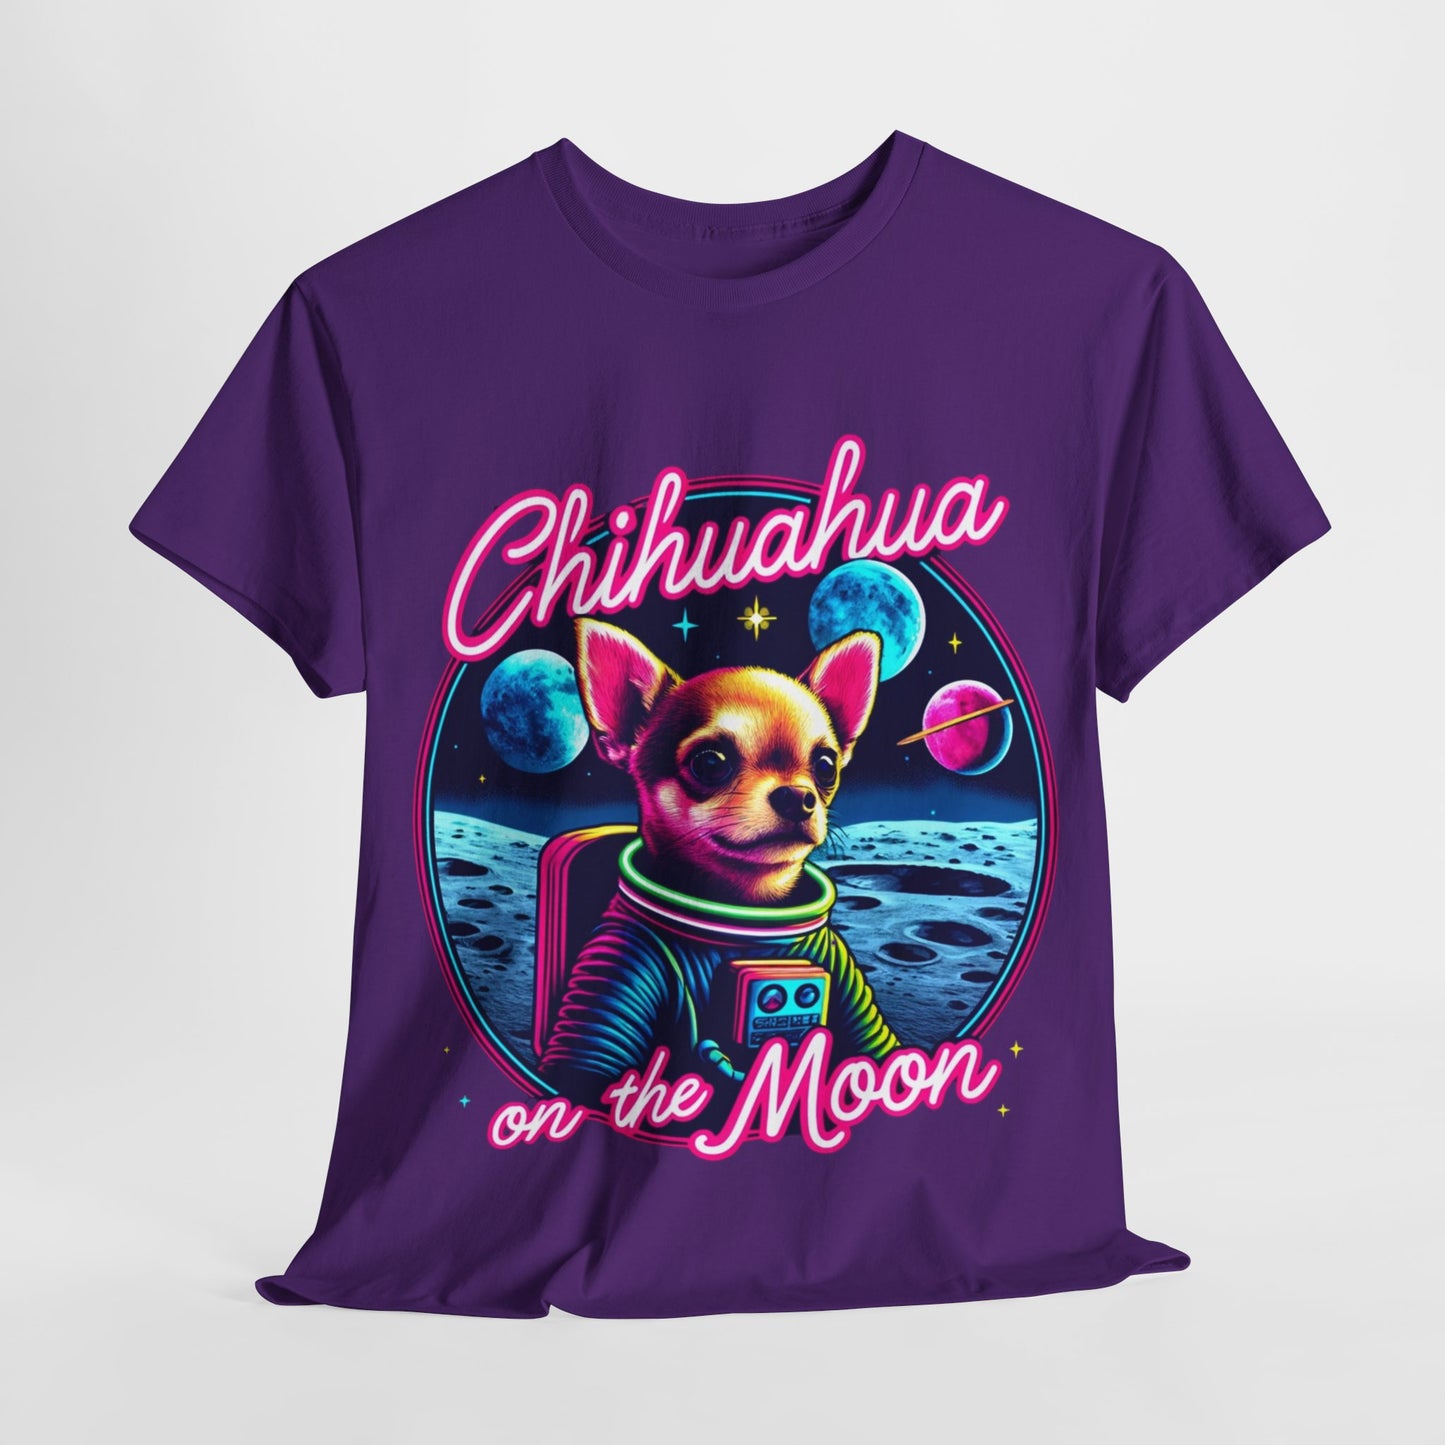 Buy 'Chihuahua on the Moon' T-Shirt: Neon Space Adventure Tee for Pet Lovers